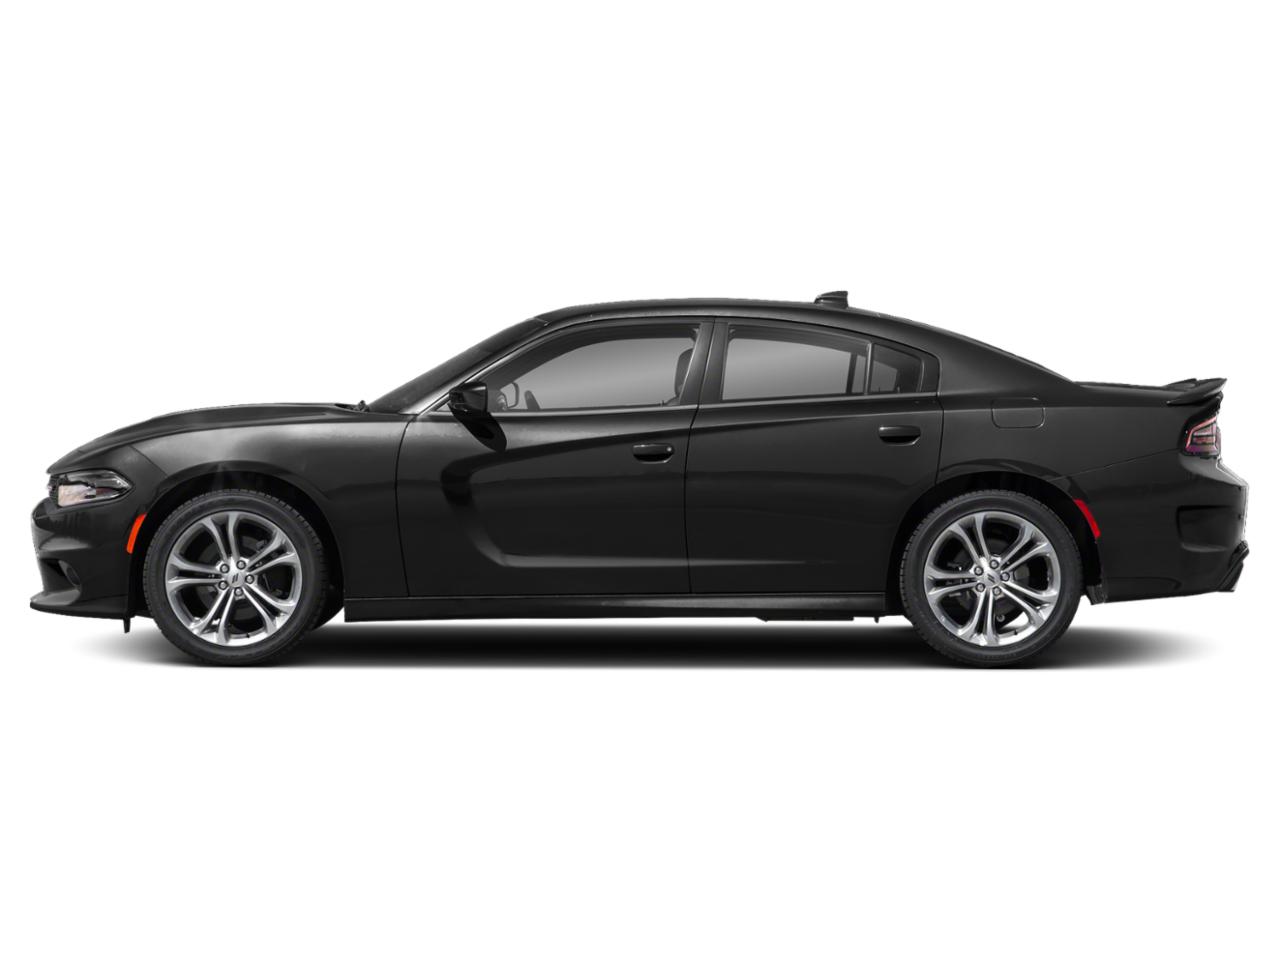 2021 Dodge Charger Vehicle Photo in Pembroke Pines, FL 33027